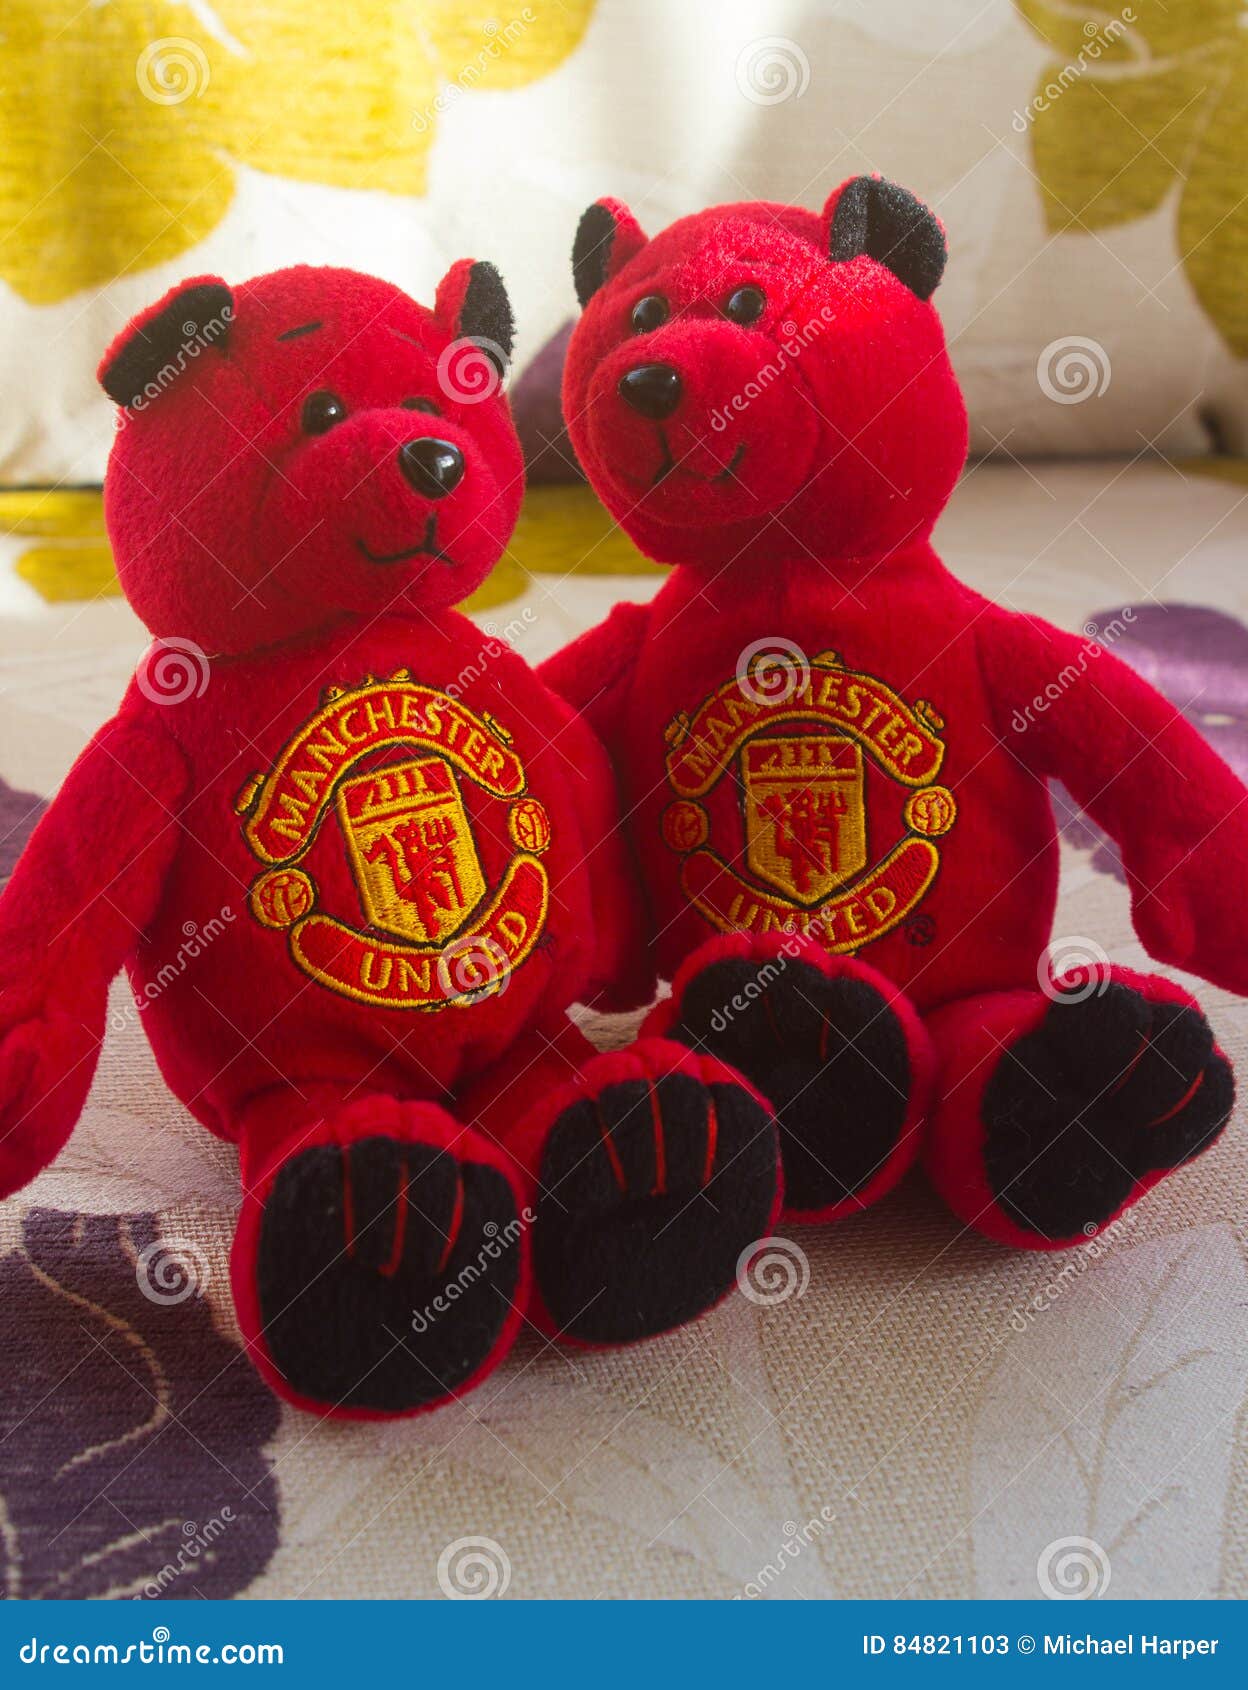 Manchester United Teddy Bears Cuddle Each Other As they Settle Down To  Watch a Football Match on TV Editorial Stock Photo - Image of  grandchildren, logo: 84821103